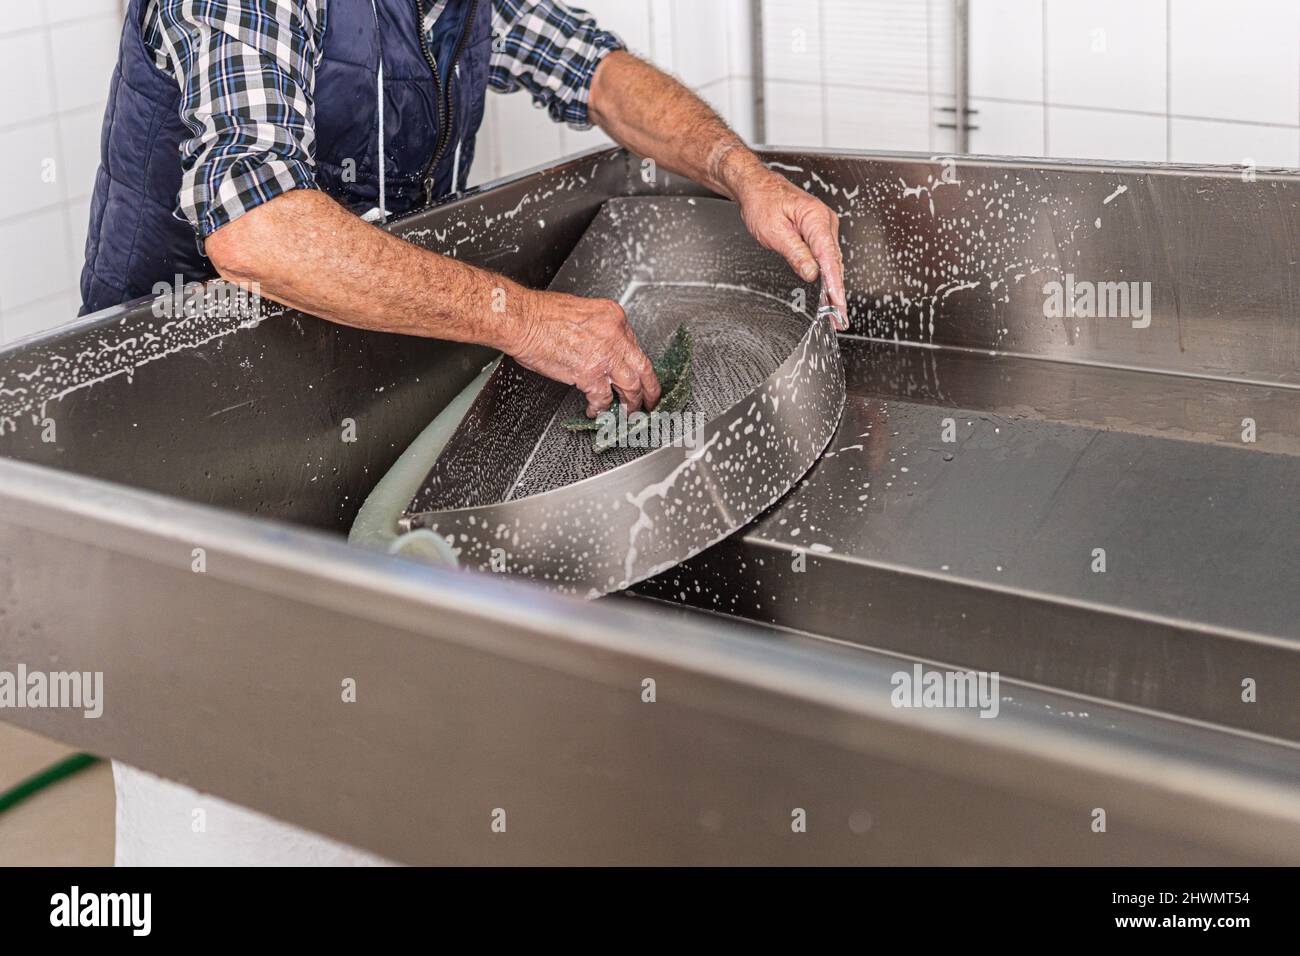 unrecognisable elderly worker scrubbing a piece of metal with a scouring pad Stock Photo